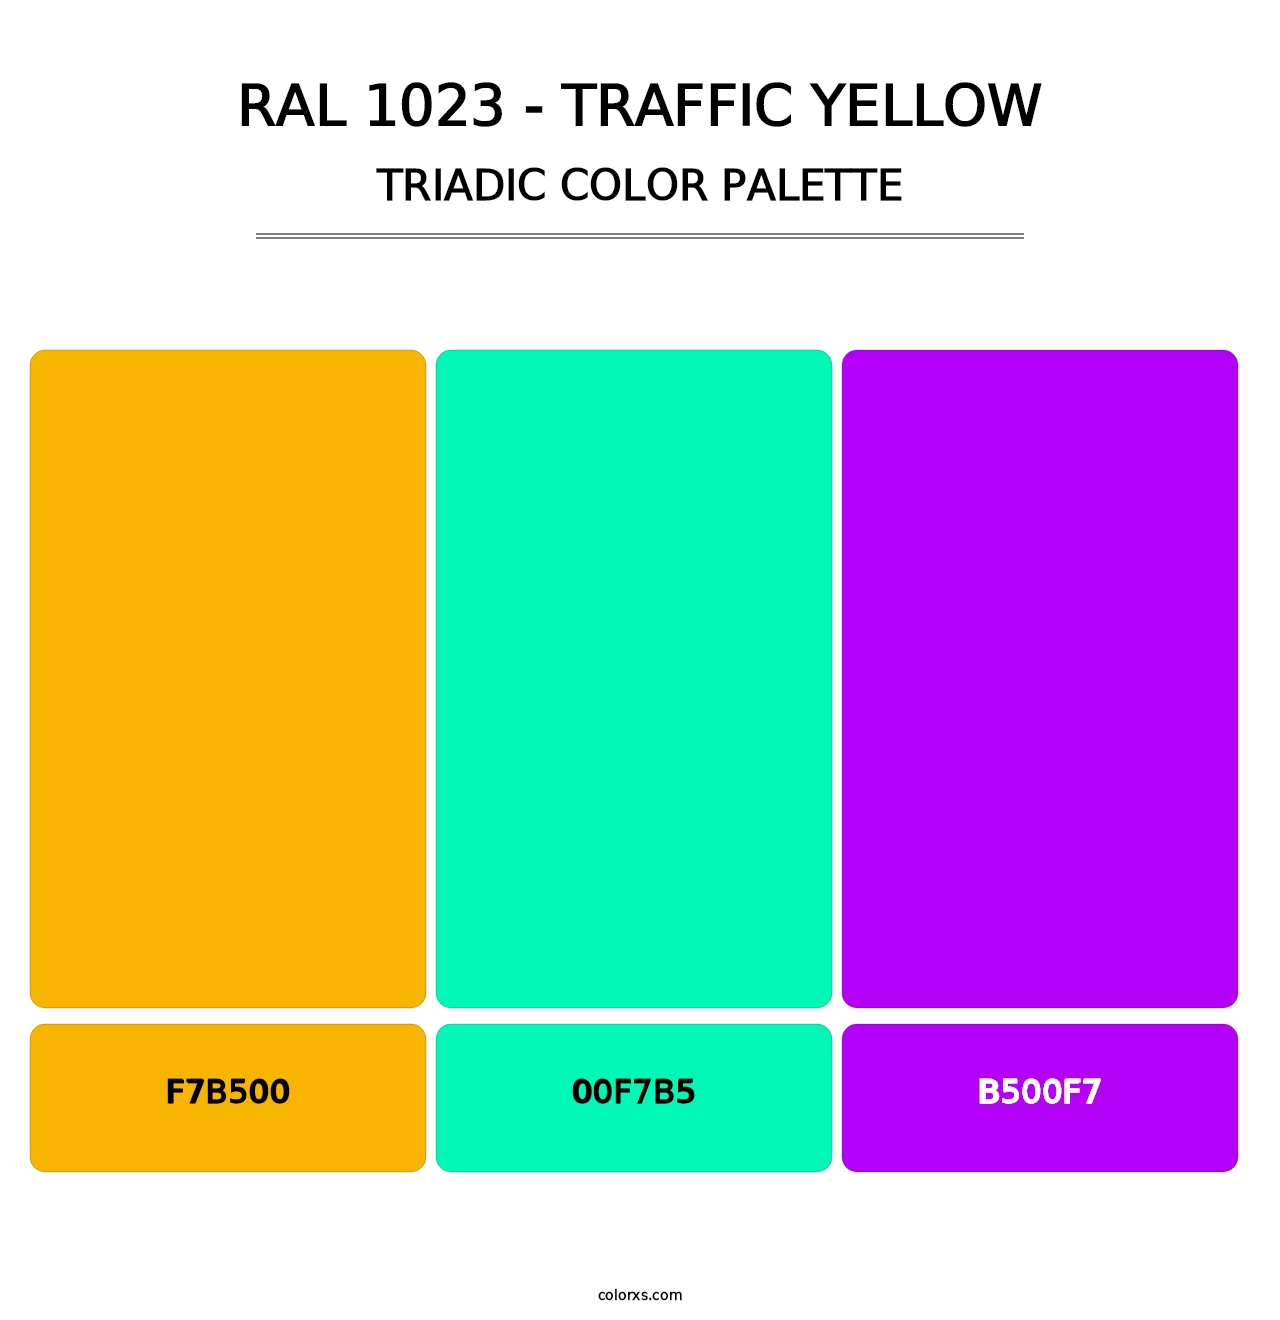 RAL 1023 - Traffic Yellow - Triadic Color Palette